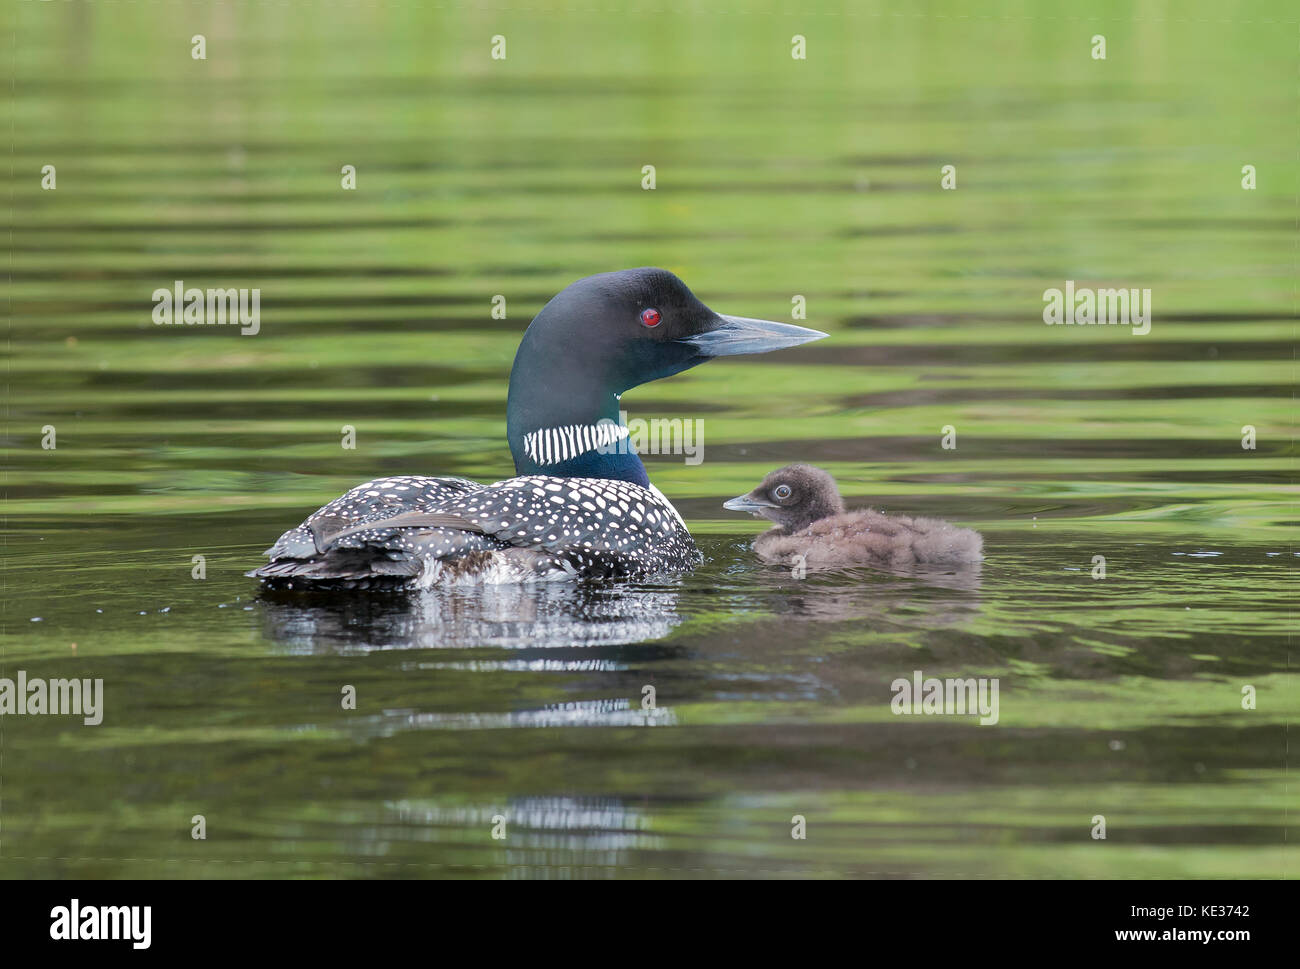 Adult common loon (Gavia immer) and chick(s), central Alberta, Canada Stock Photo